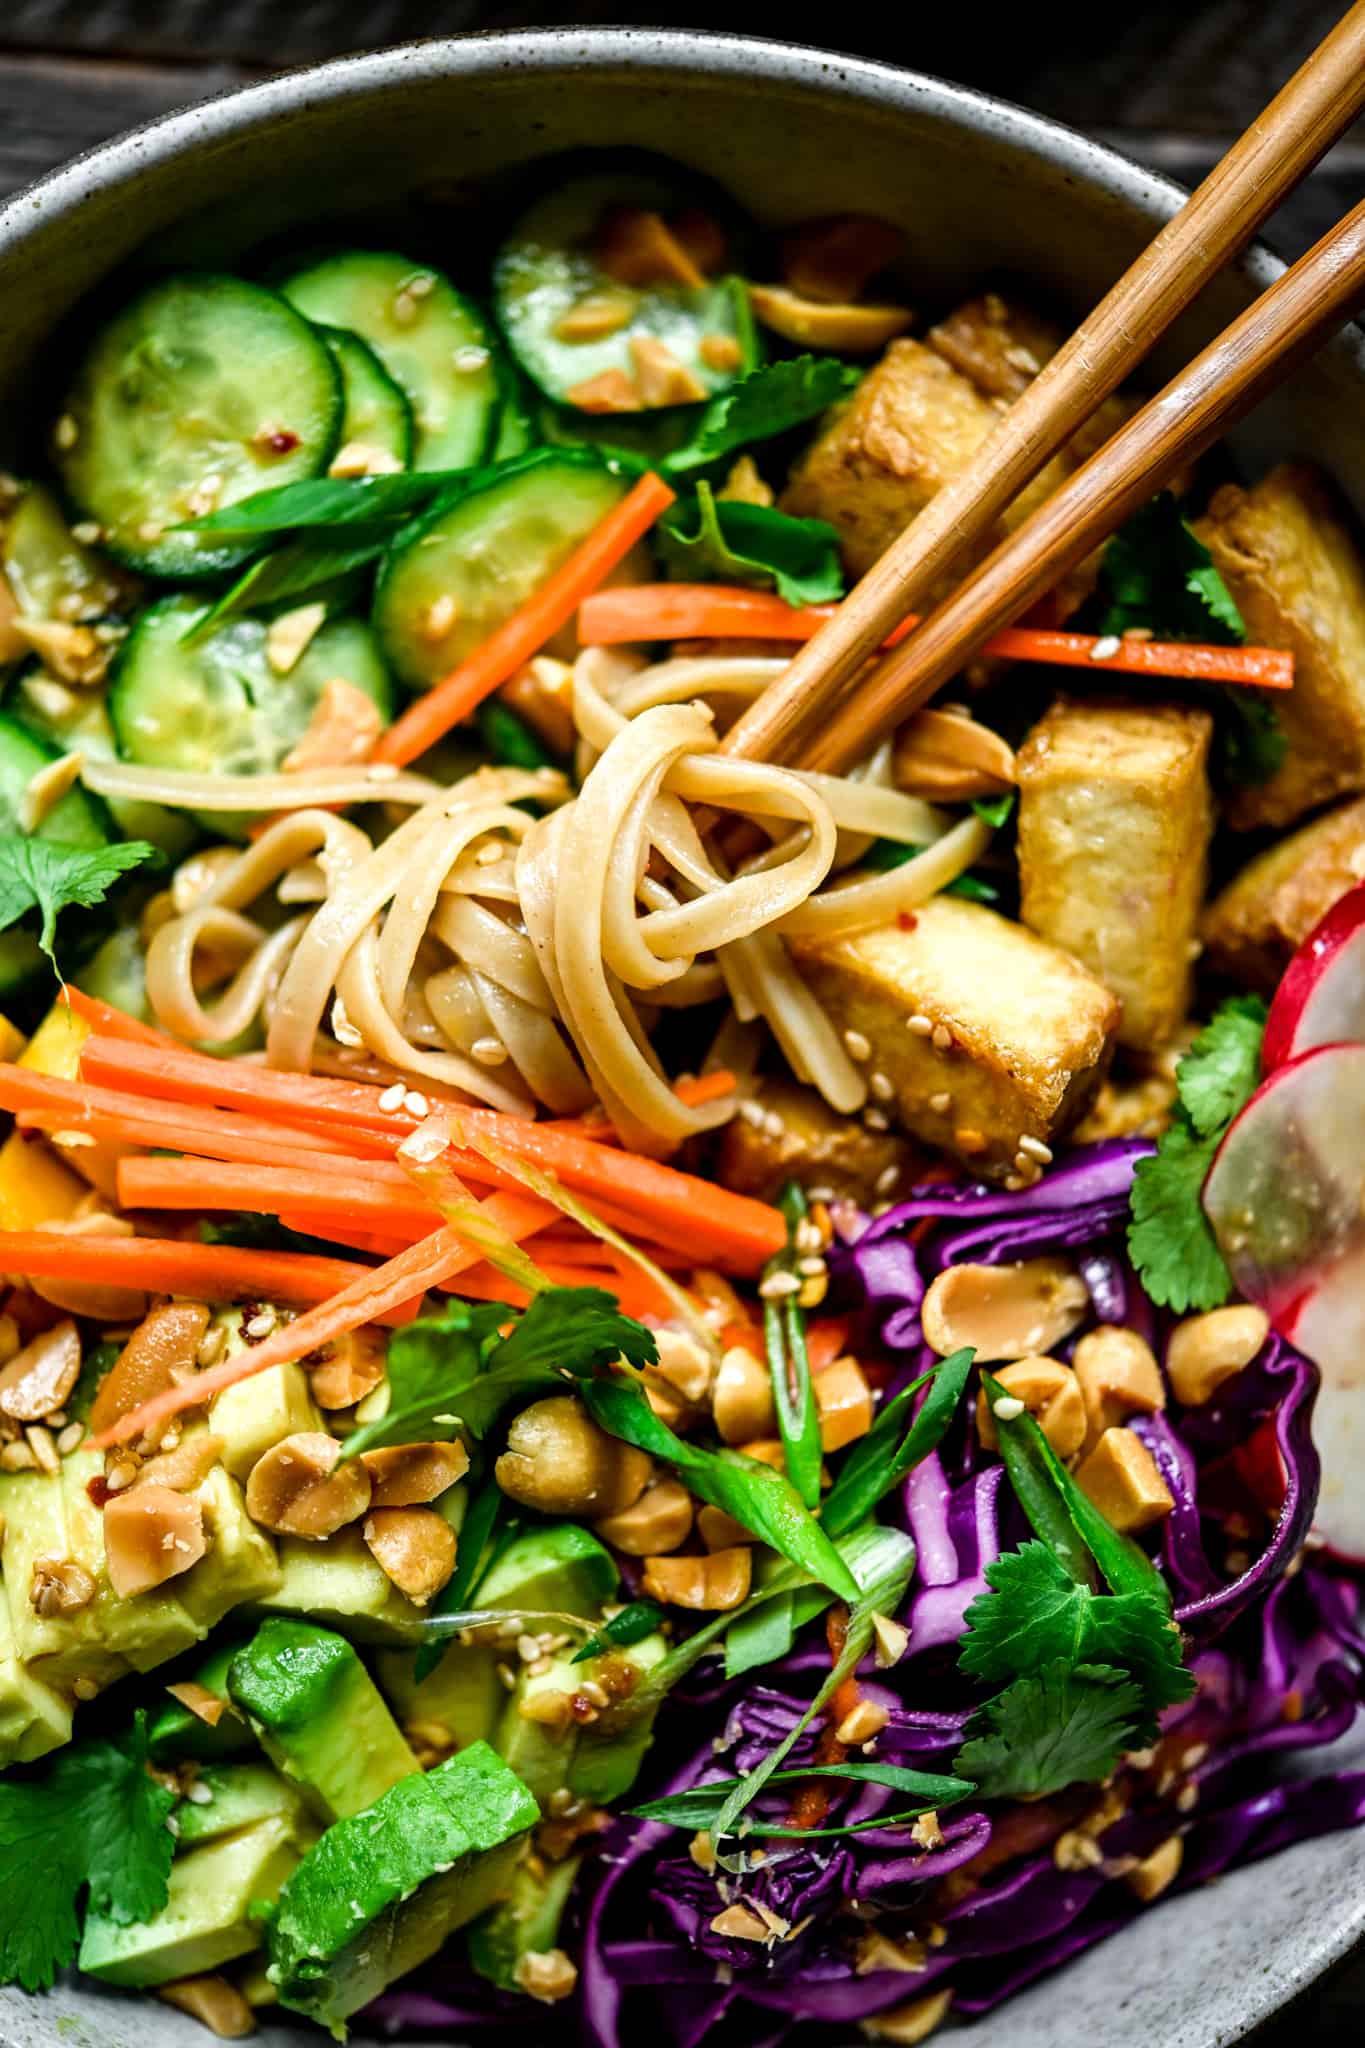 Overhead view of chopsticks and rice noodles with asian vegetables